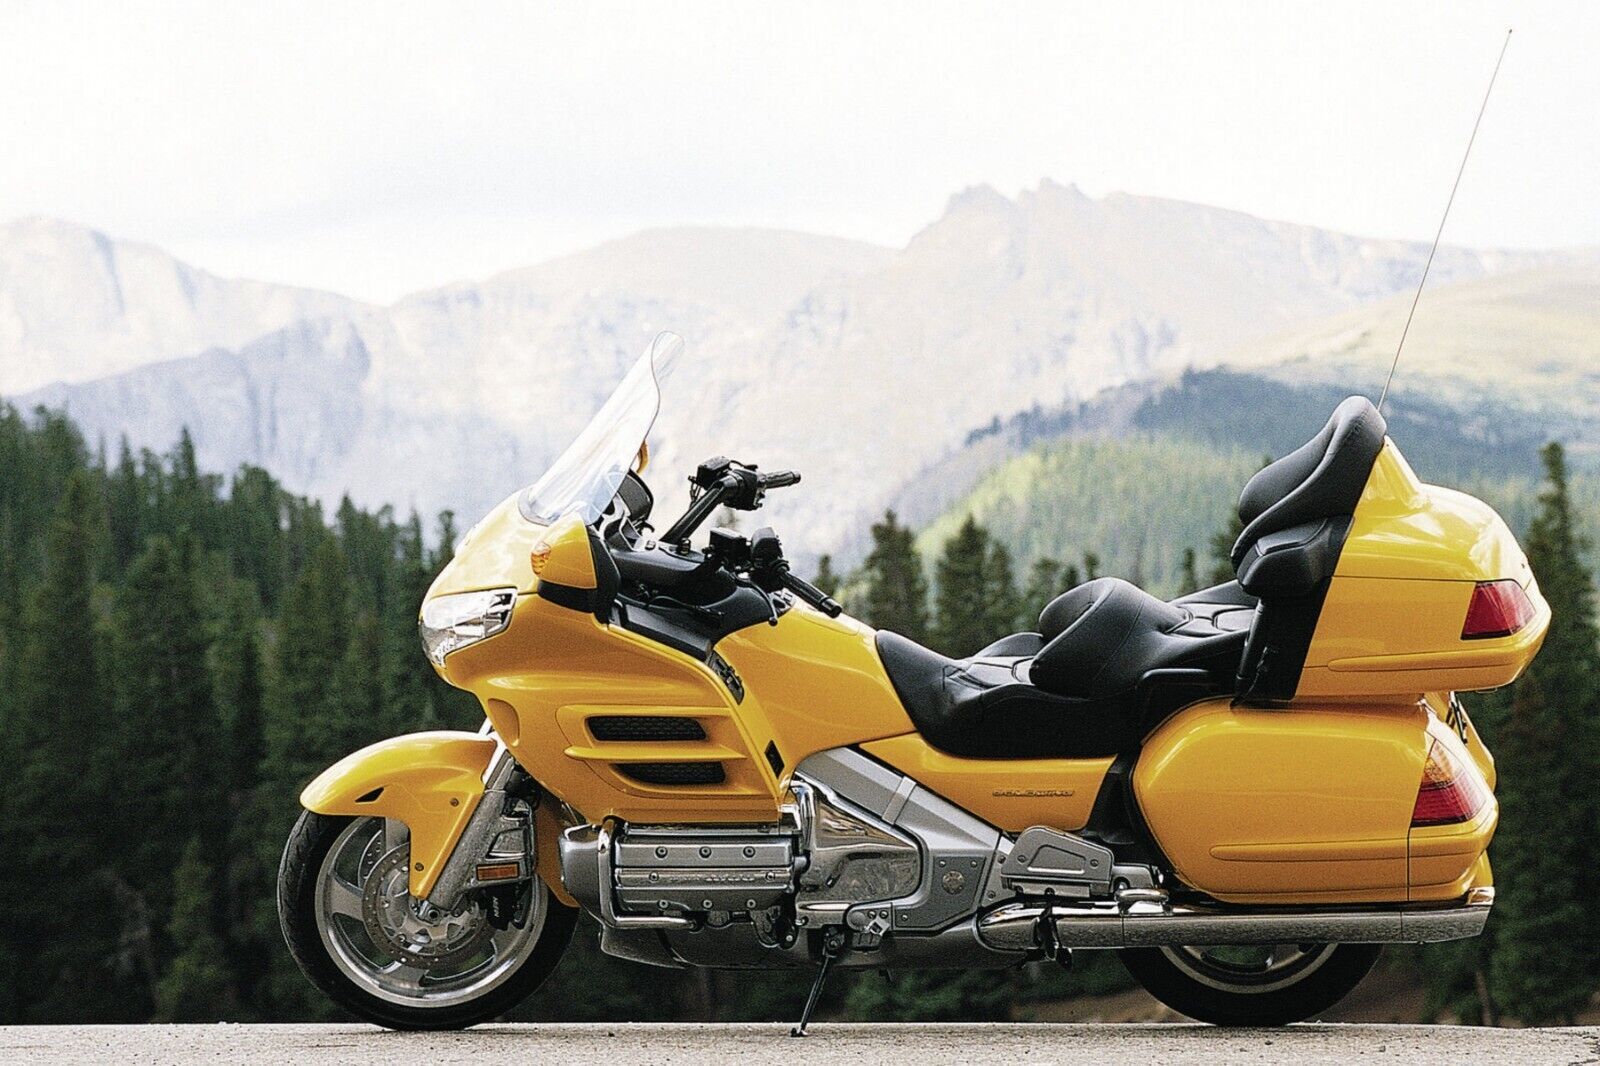 Primary image for 2001 Honda Goldwing yellow Motorcycle | 24x36 inch POSTER | vintage classic